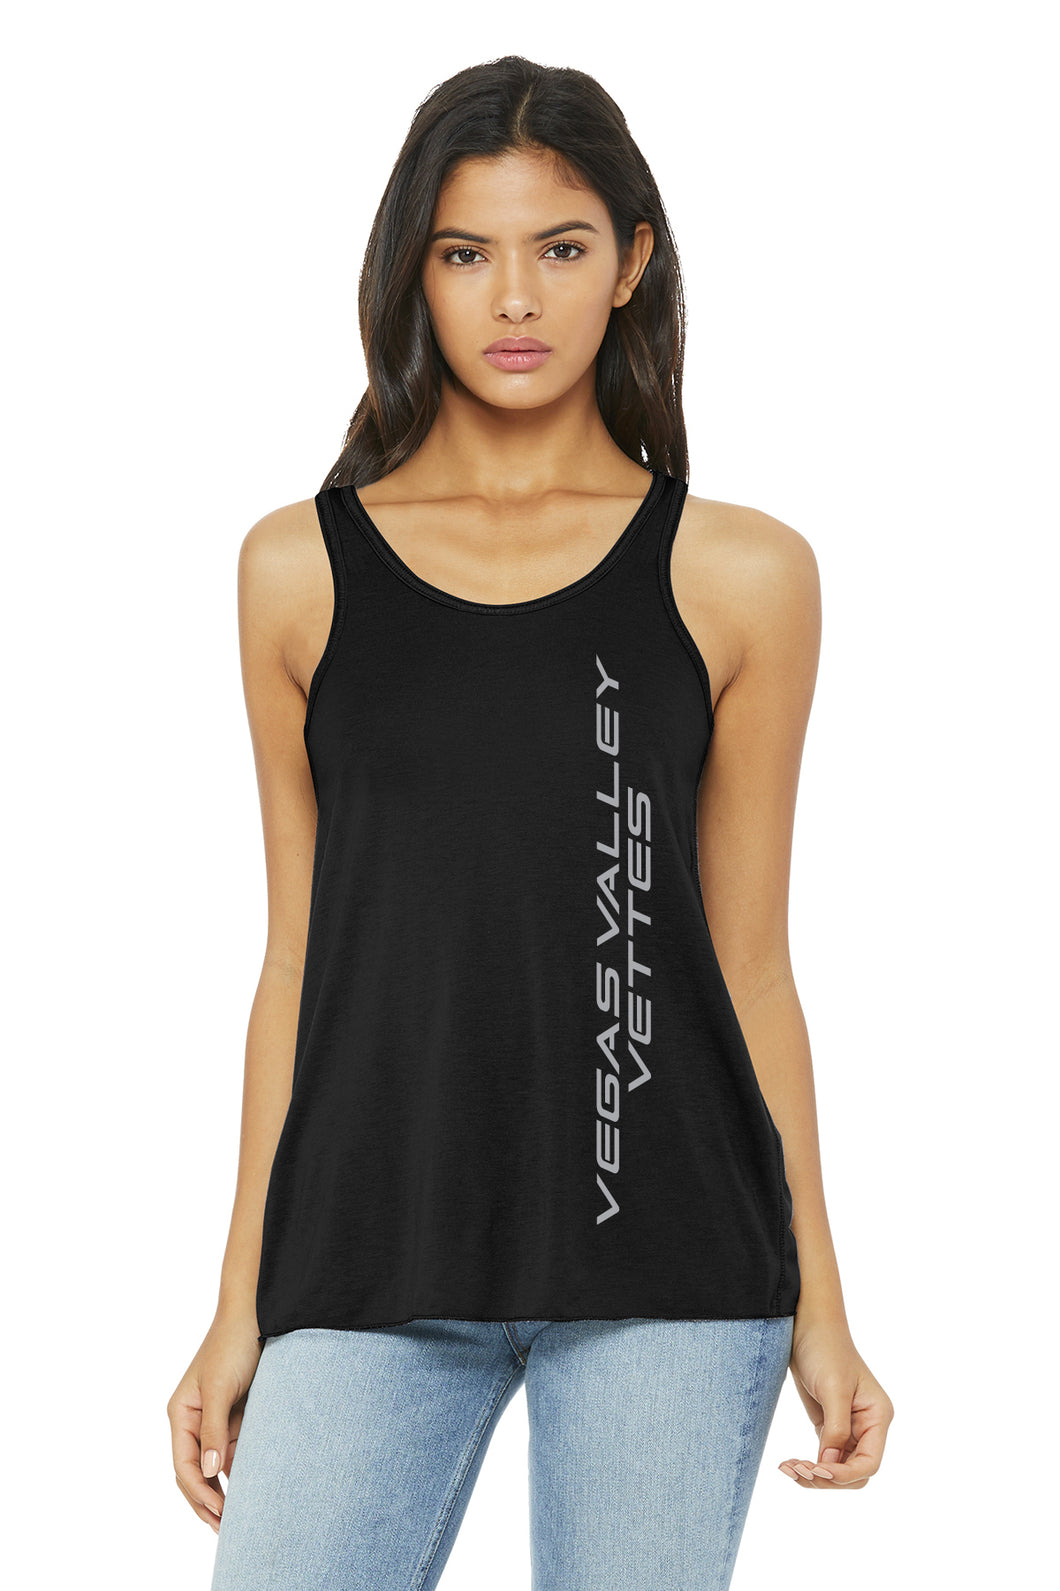 Vegas Valley Vettes Vertical Front Woman's Tank Top